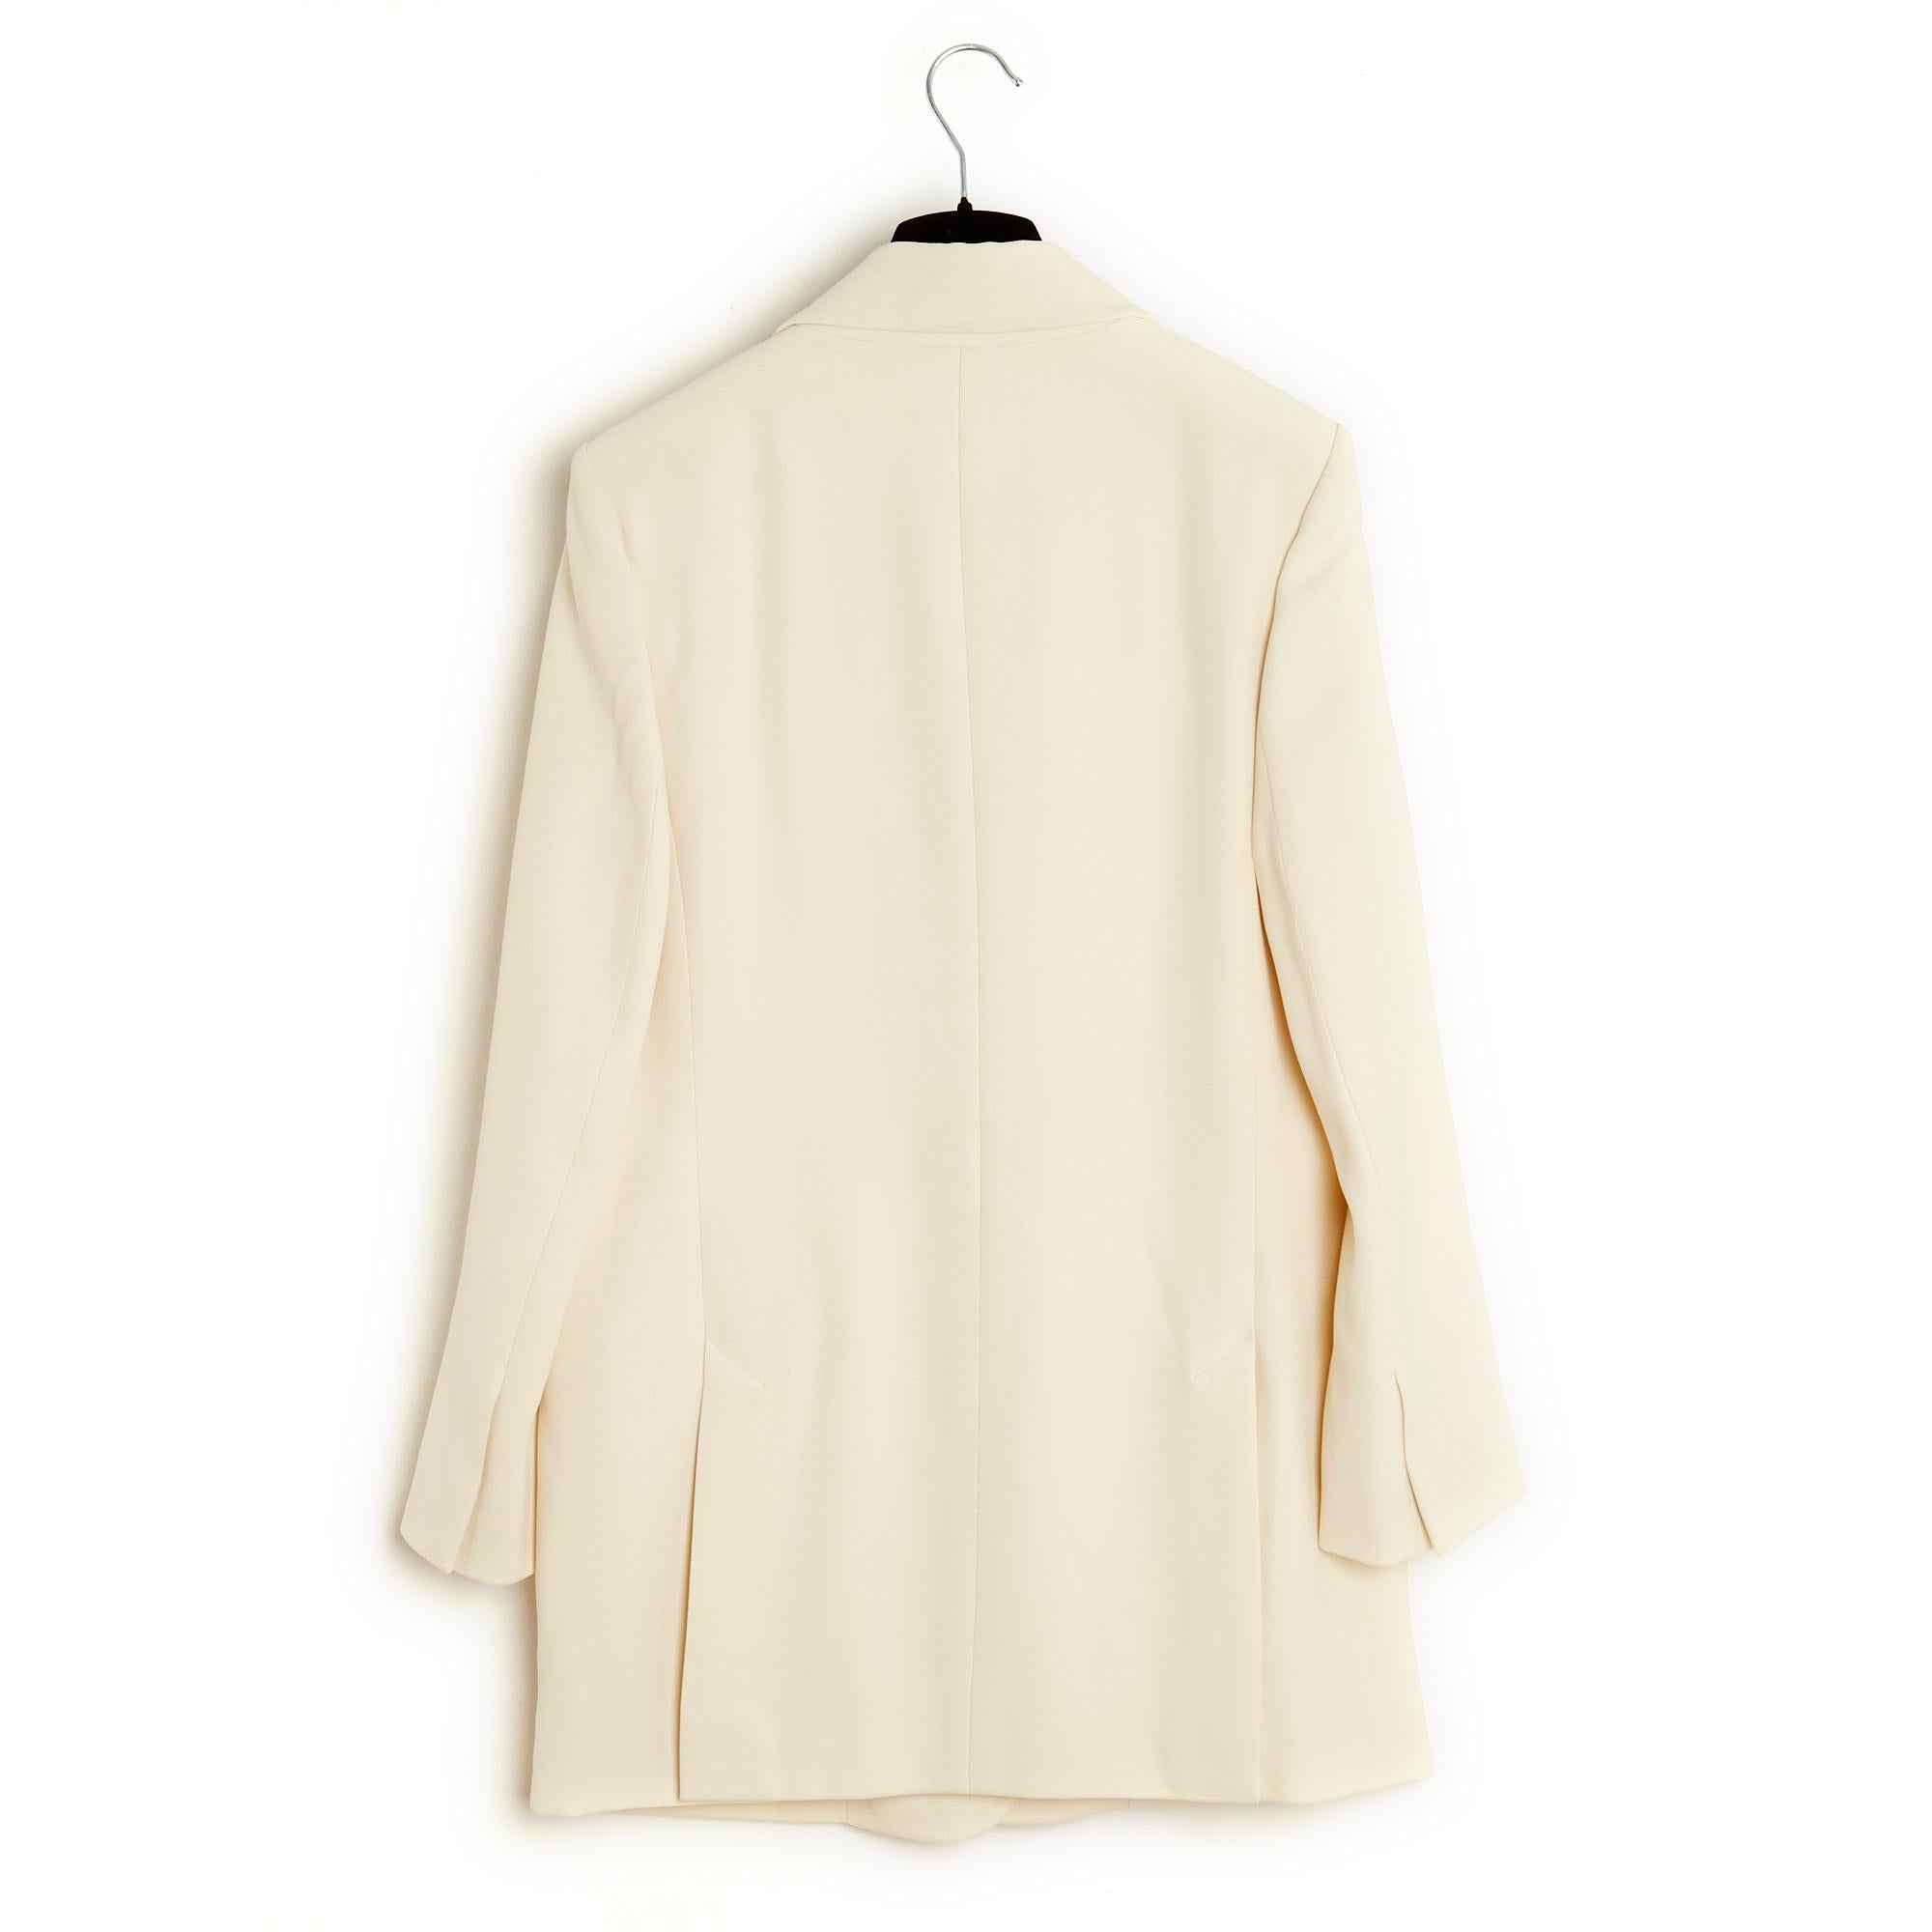 SS2015 Ecru Crepe long jacket FR42 New with tags 2